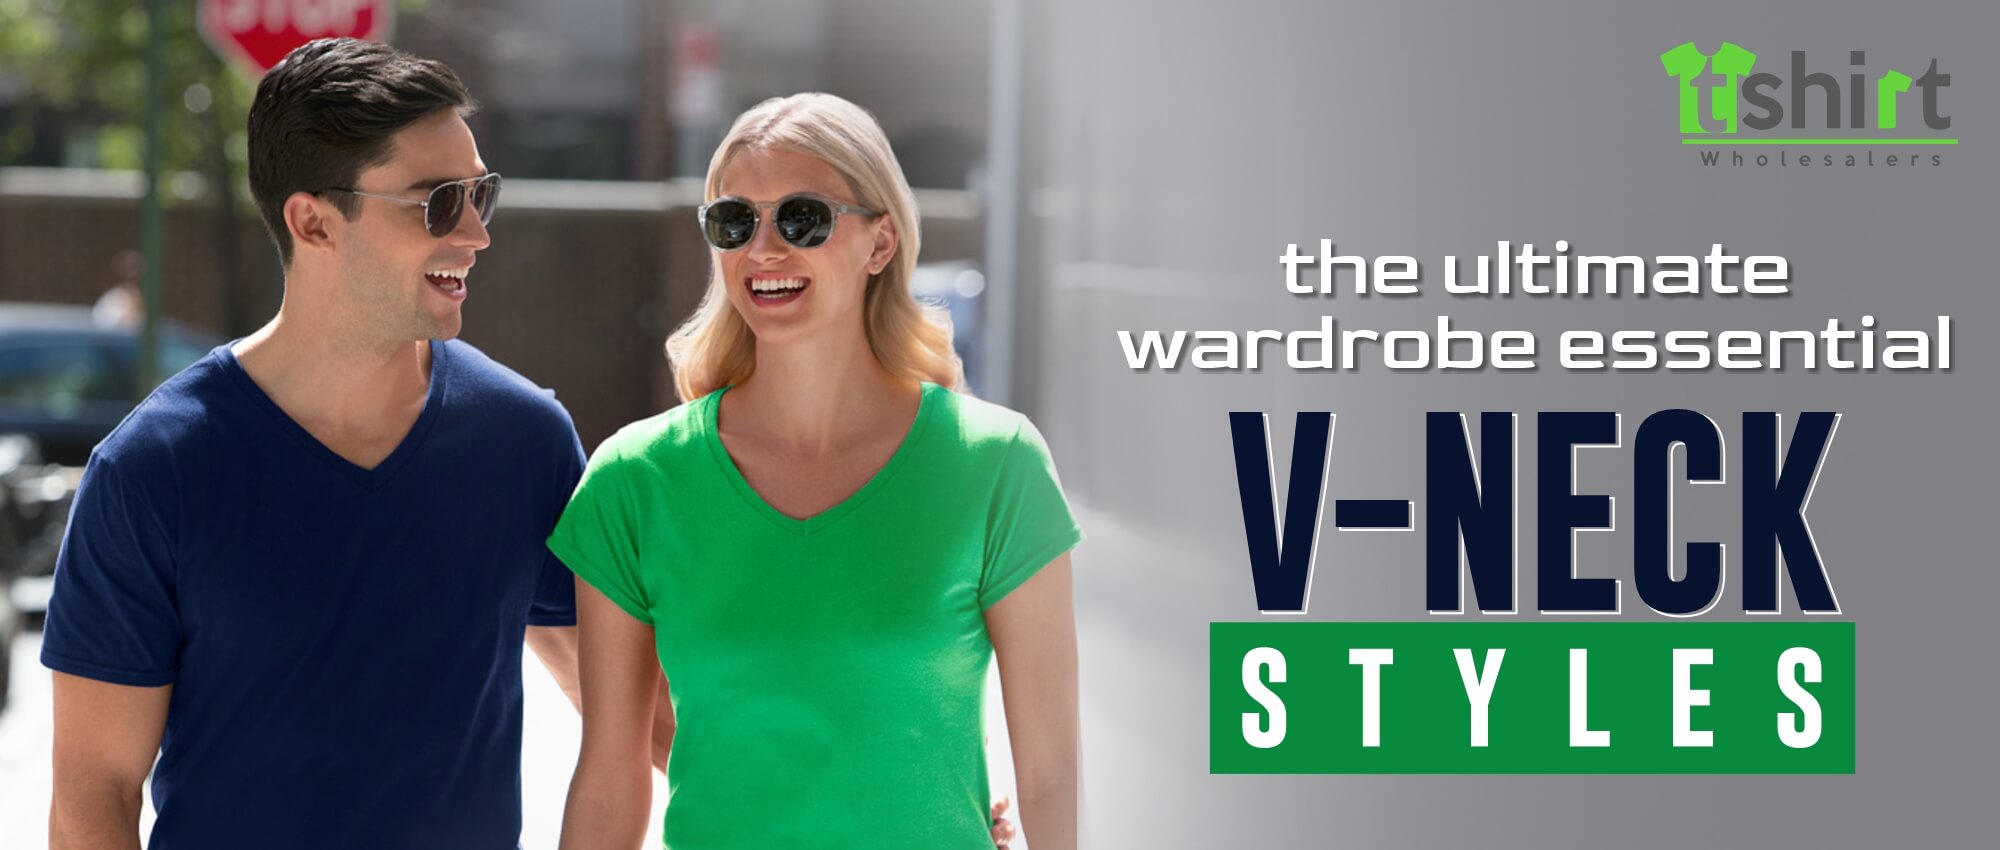 THE ULTIMATE WARDROBE ESSENTIAL V-NECK STYLES